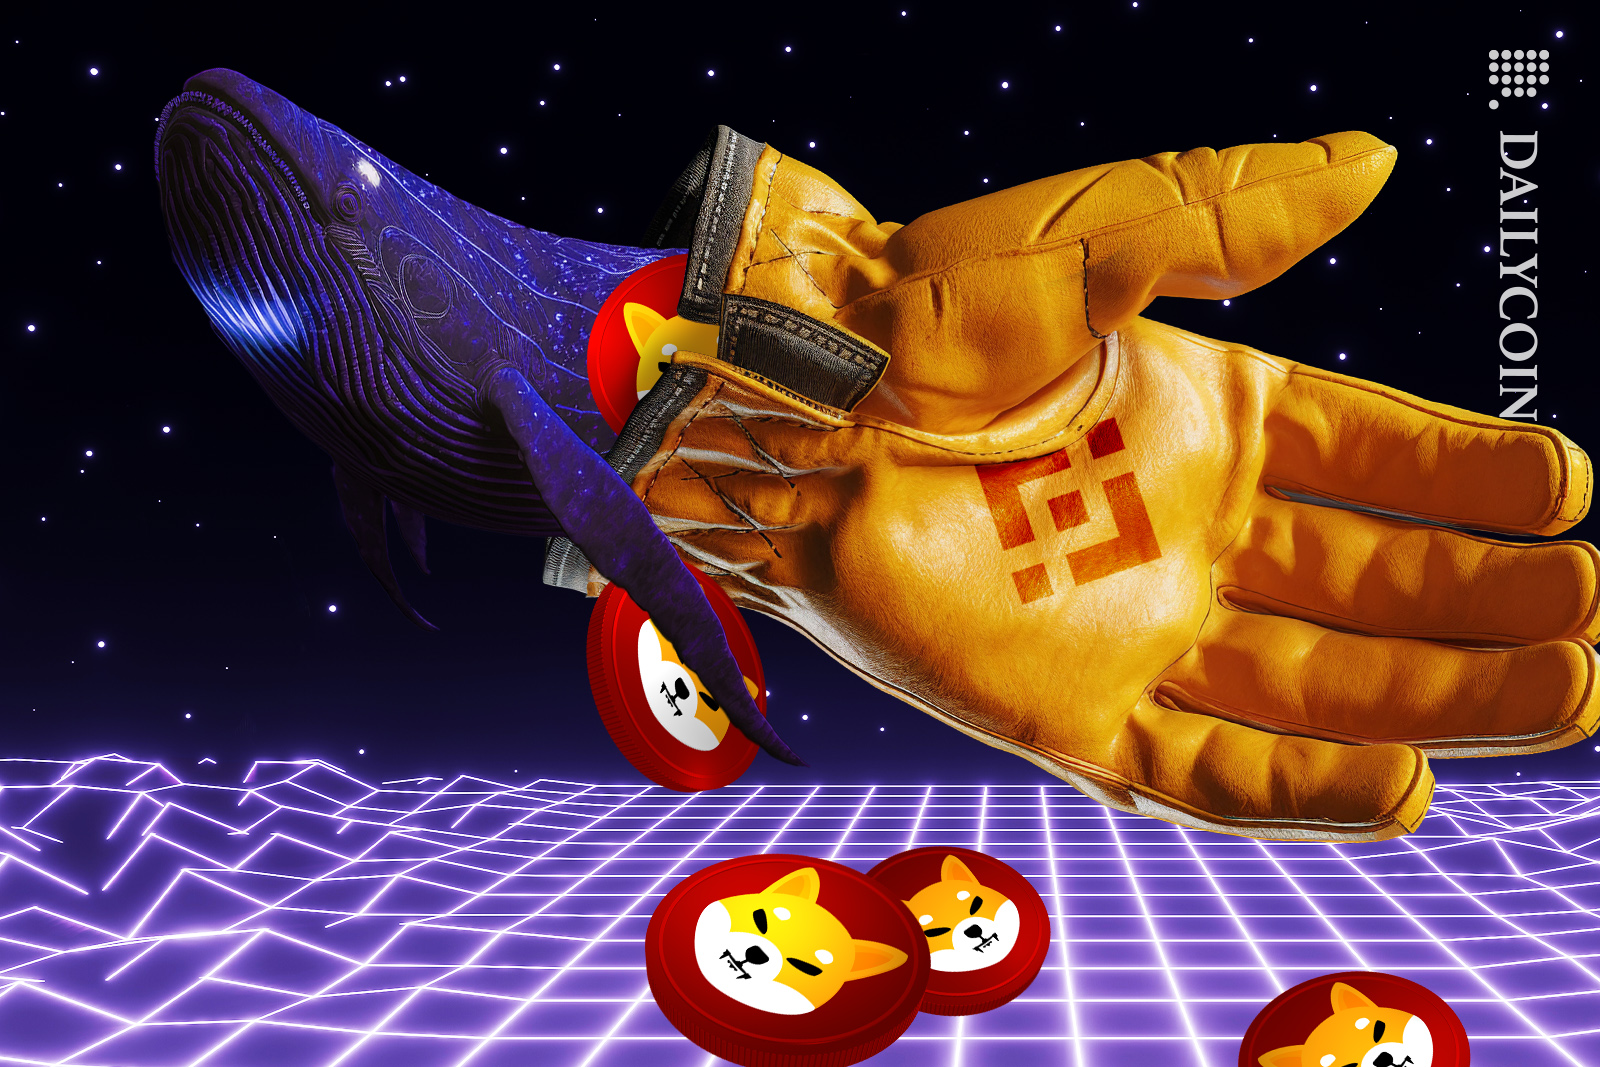 Whale coming out of a Binace glove releasing his shib coins on to the digital floor.